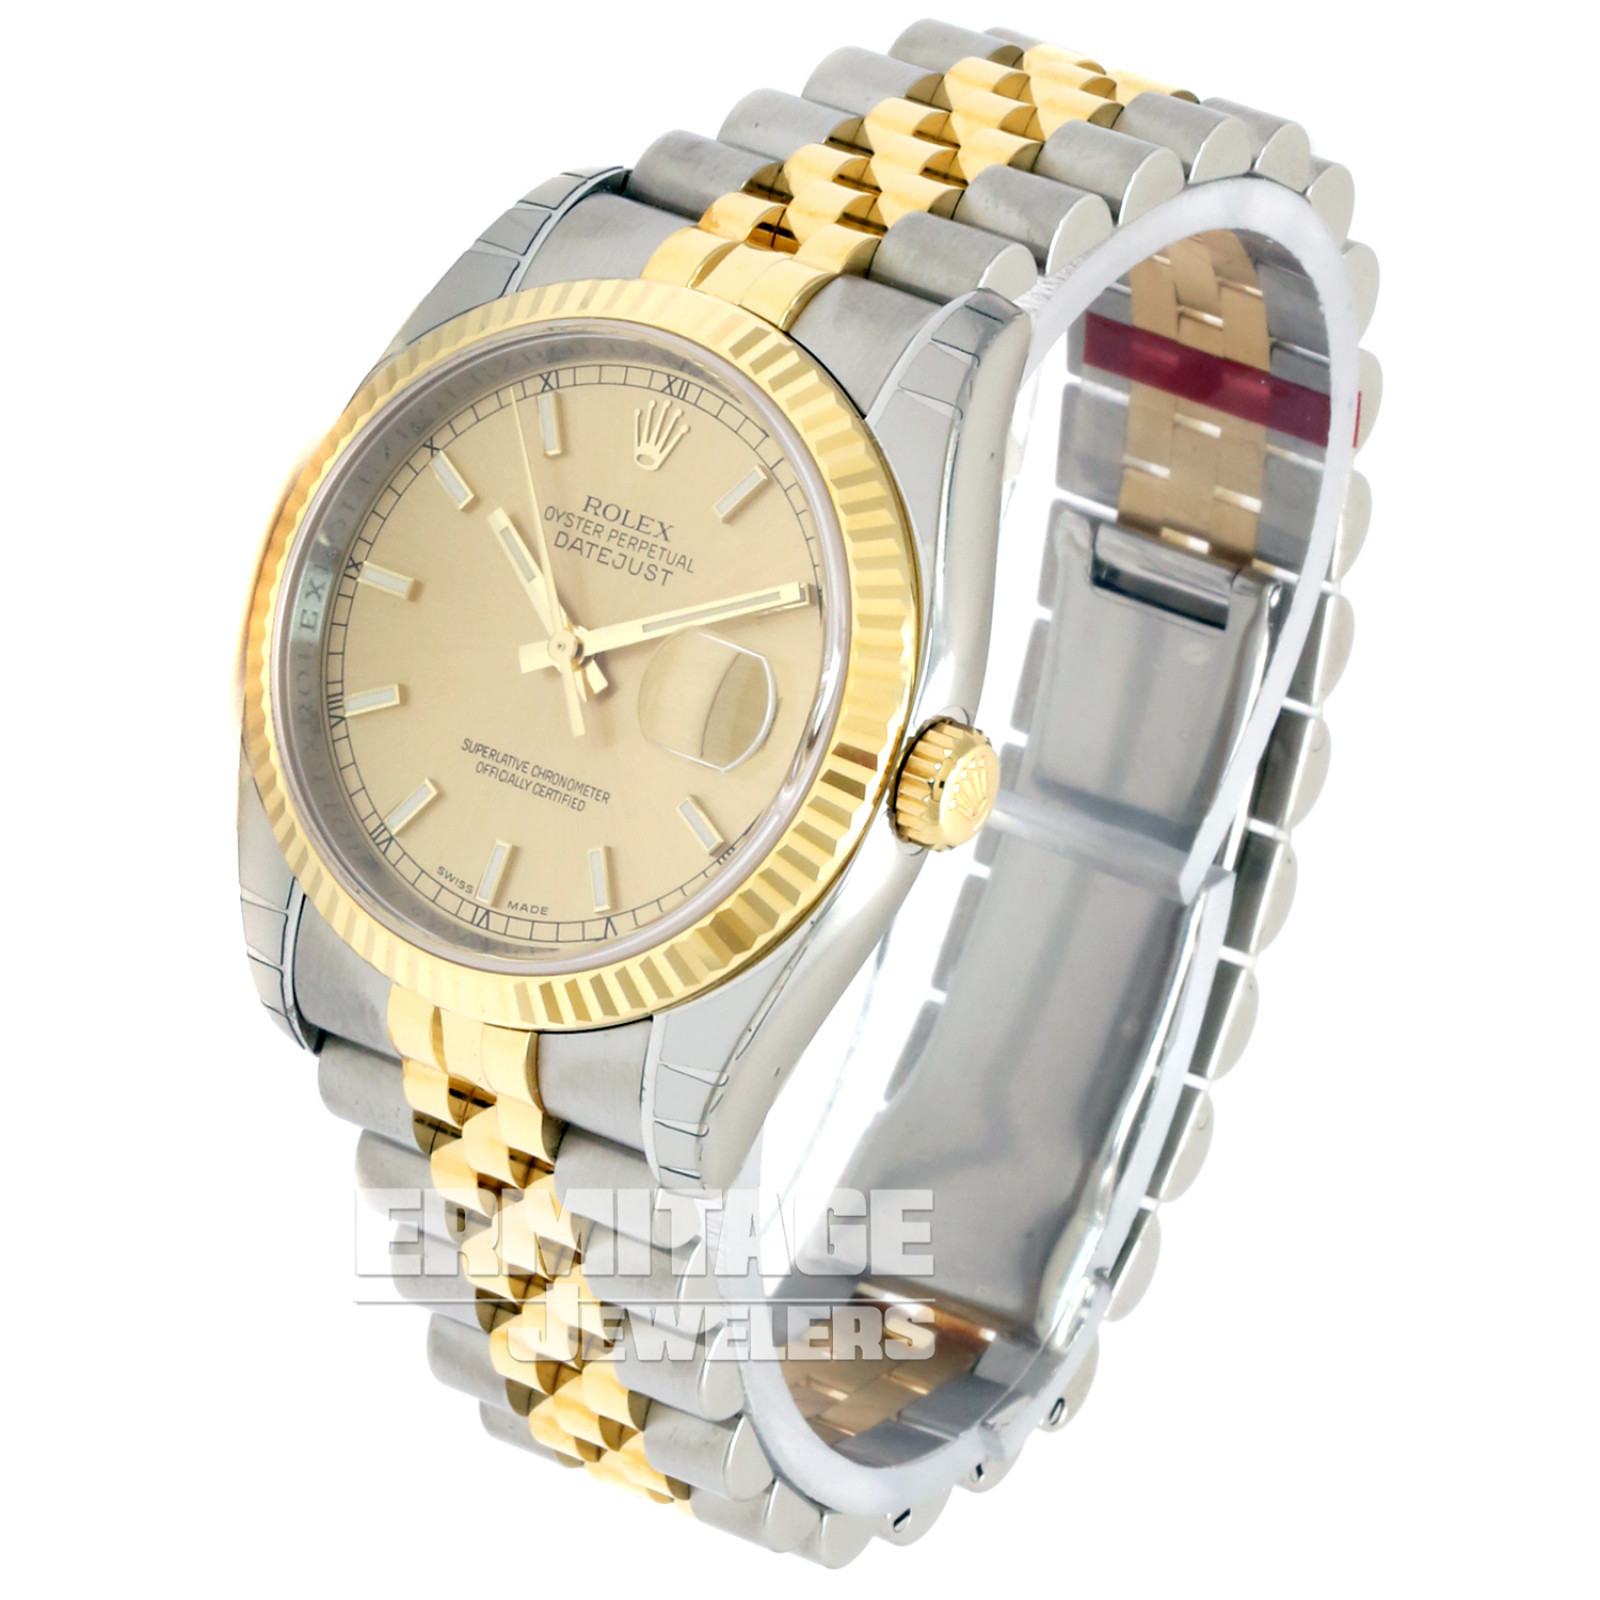 Sell Rolex Datejust 116233 with Champagne Dial